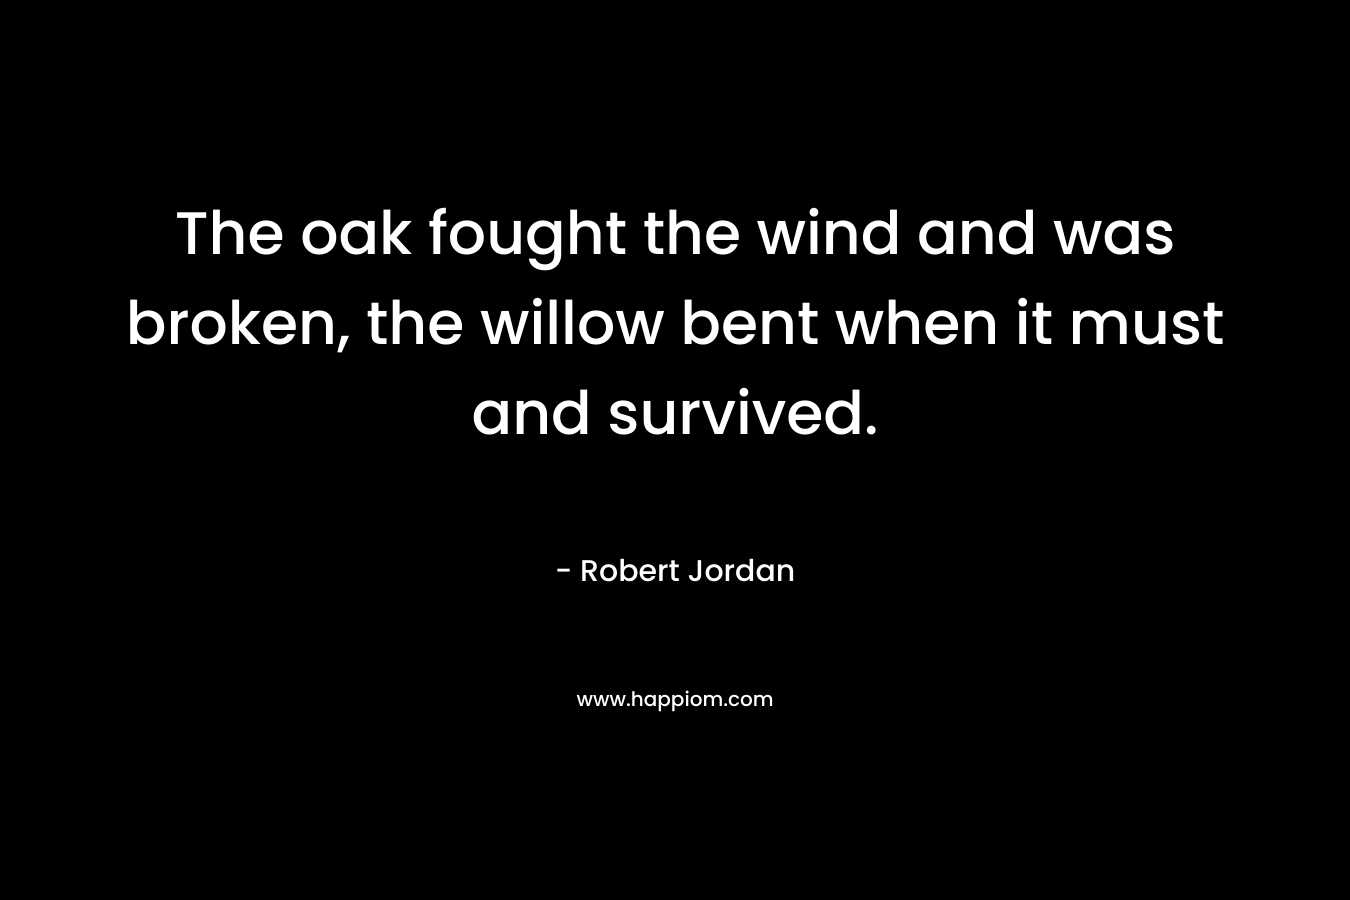 The oak fought the wind and was broken, the willow bent when it must and survived.